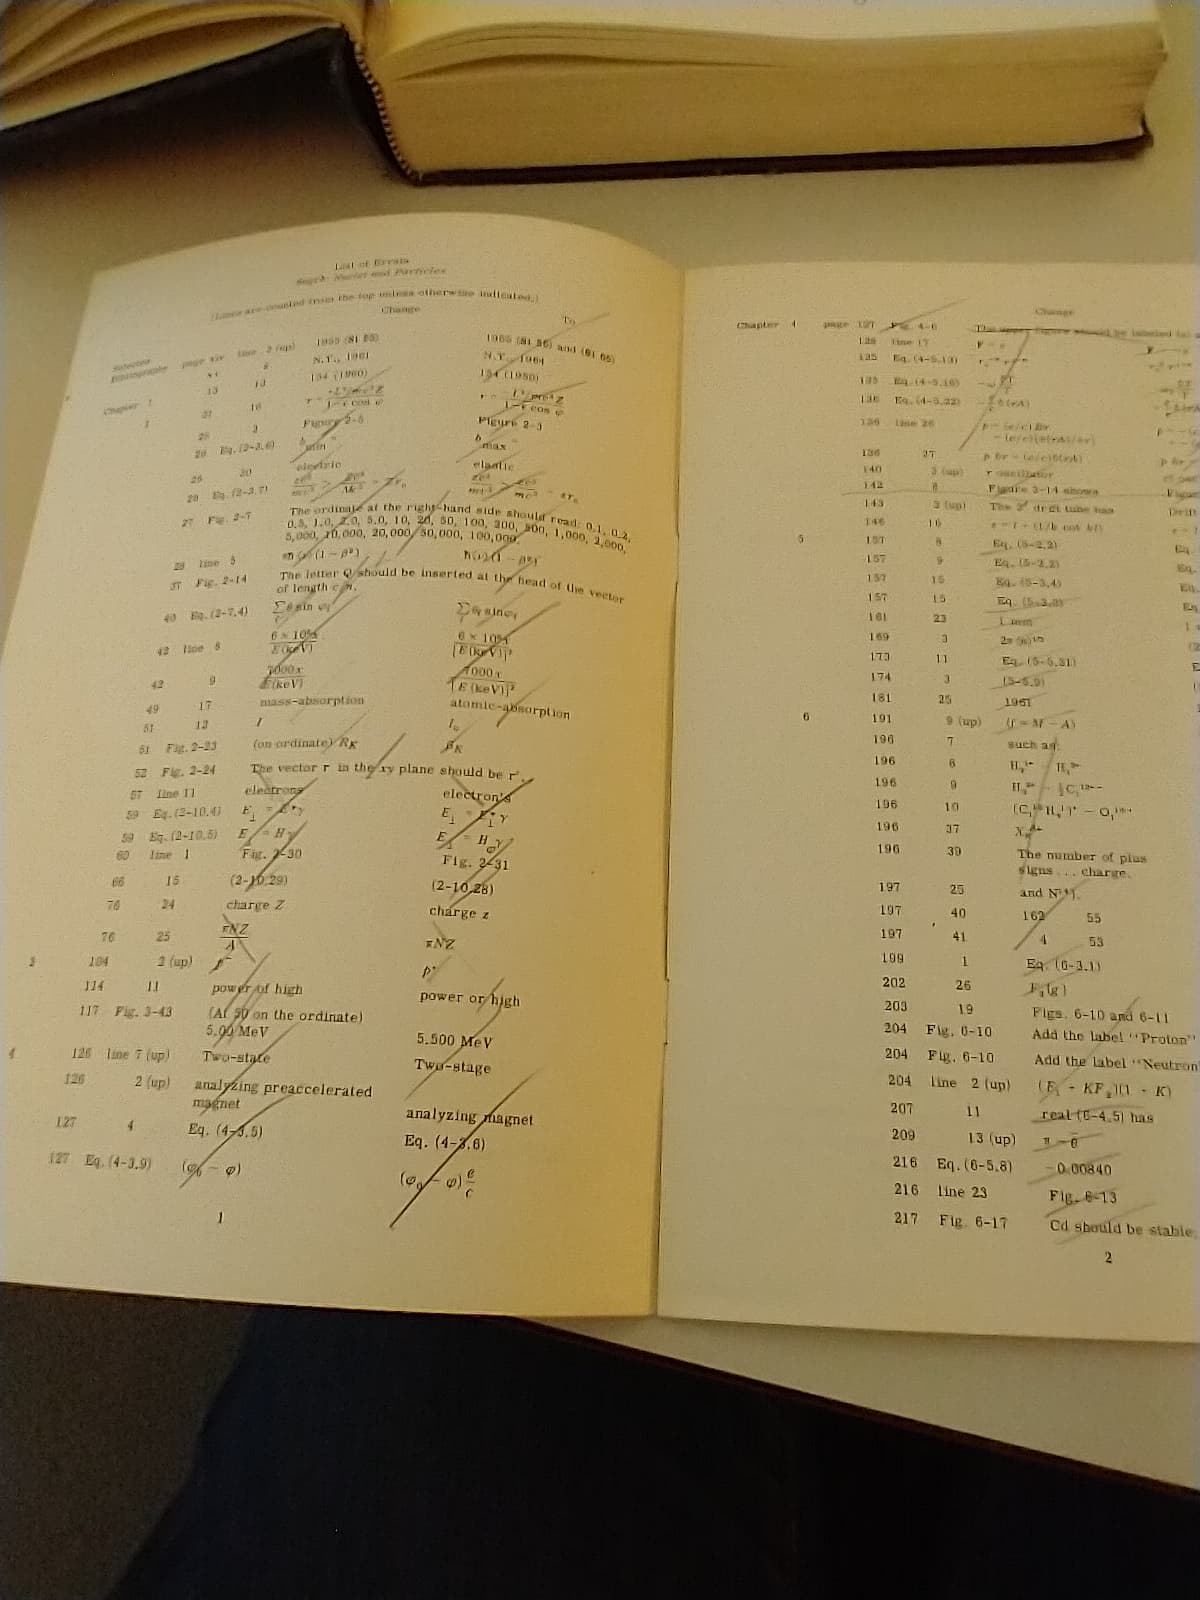 Lists of corrections, checked off by Emilio Segrè